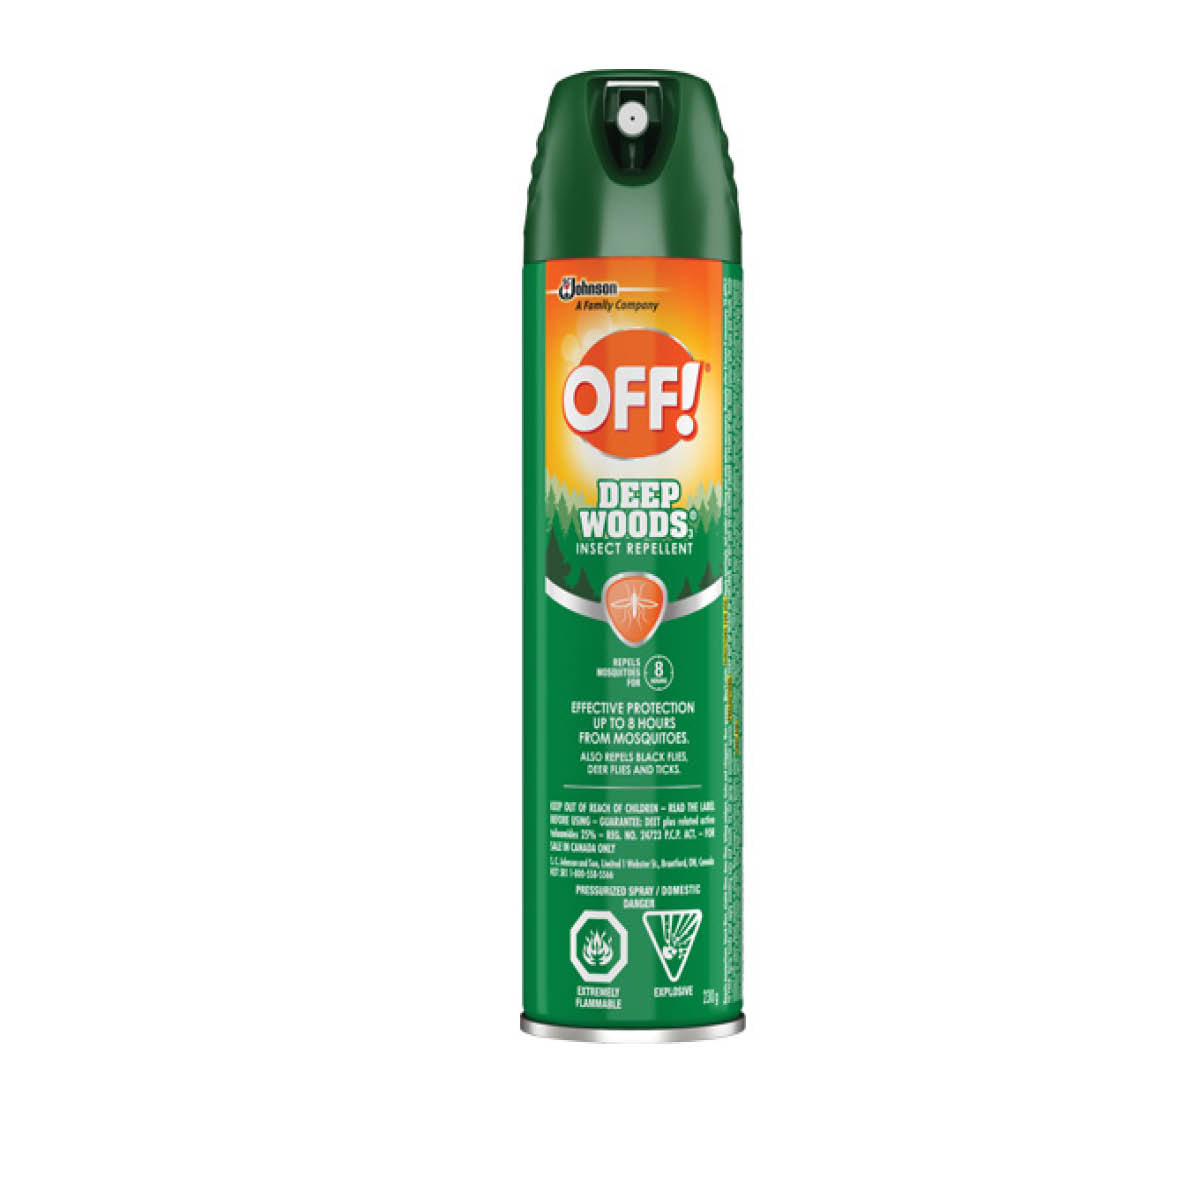 OFF! Deep Woods Mosquito Insect Repellent Spray, 230 g